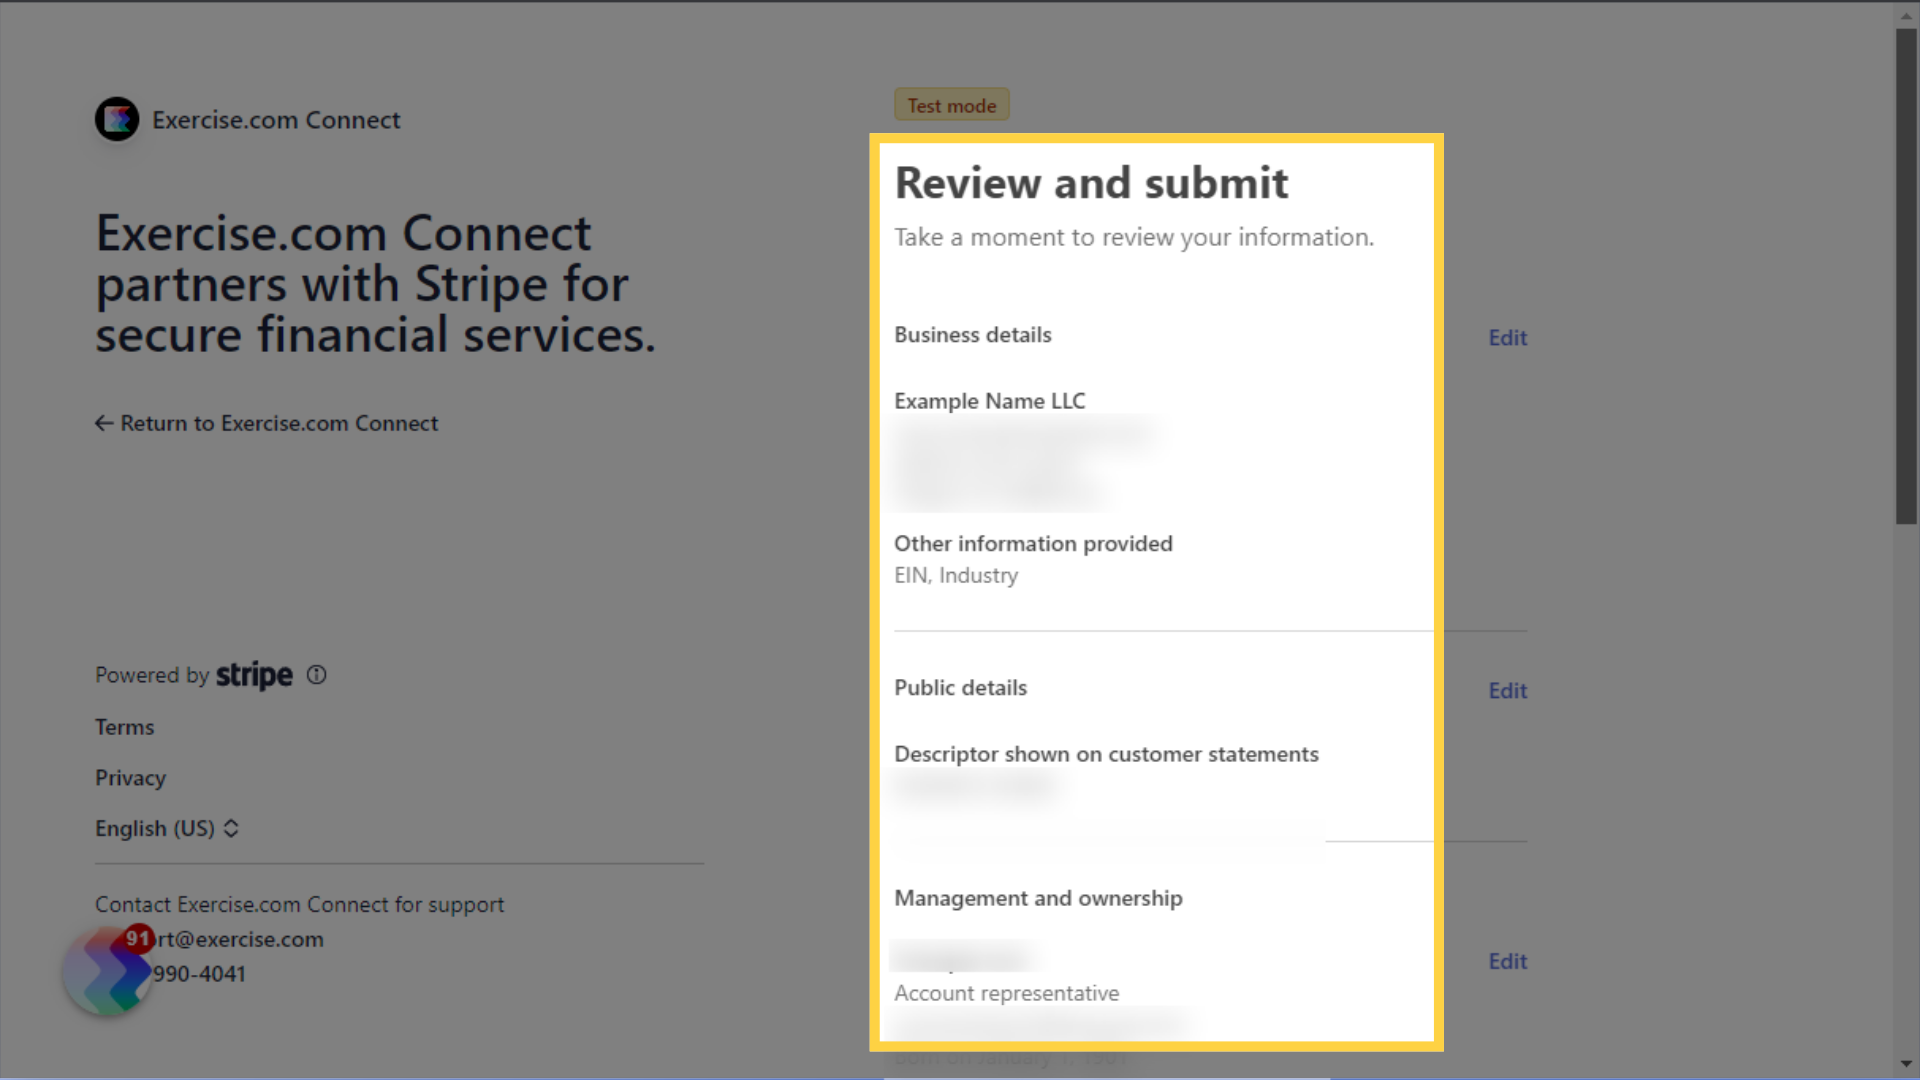 Review your account details and submit them to complete your account setup.